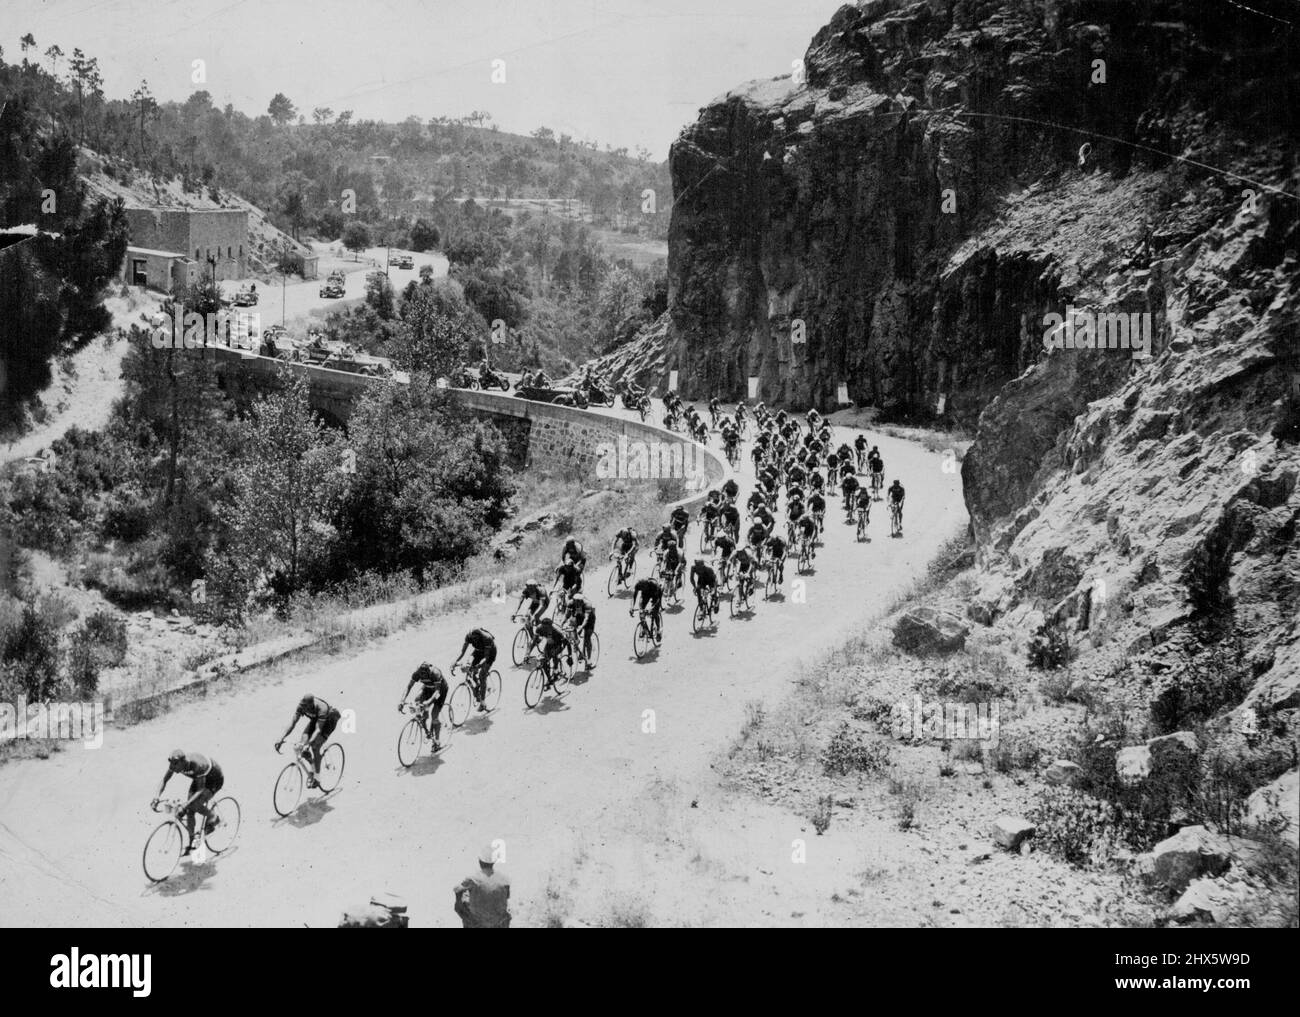 One of the many mountain climbs which make 'Le Tour' a back-breaking assignment for competitors. Having a French mountain village Tour de France competitors string out over a winding road on yet another stage of the 25-day ***** 3000 miles race. October 24, 1950. (Photo by Sports And General Press Agency Limited). sports, sport, athlete, athletic, Stock Photo